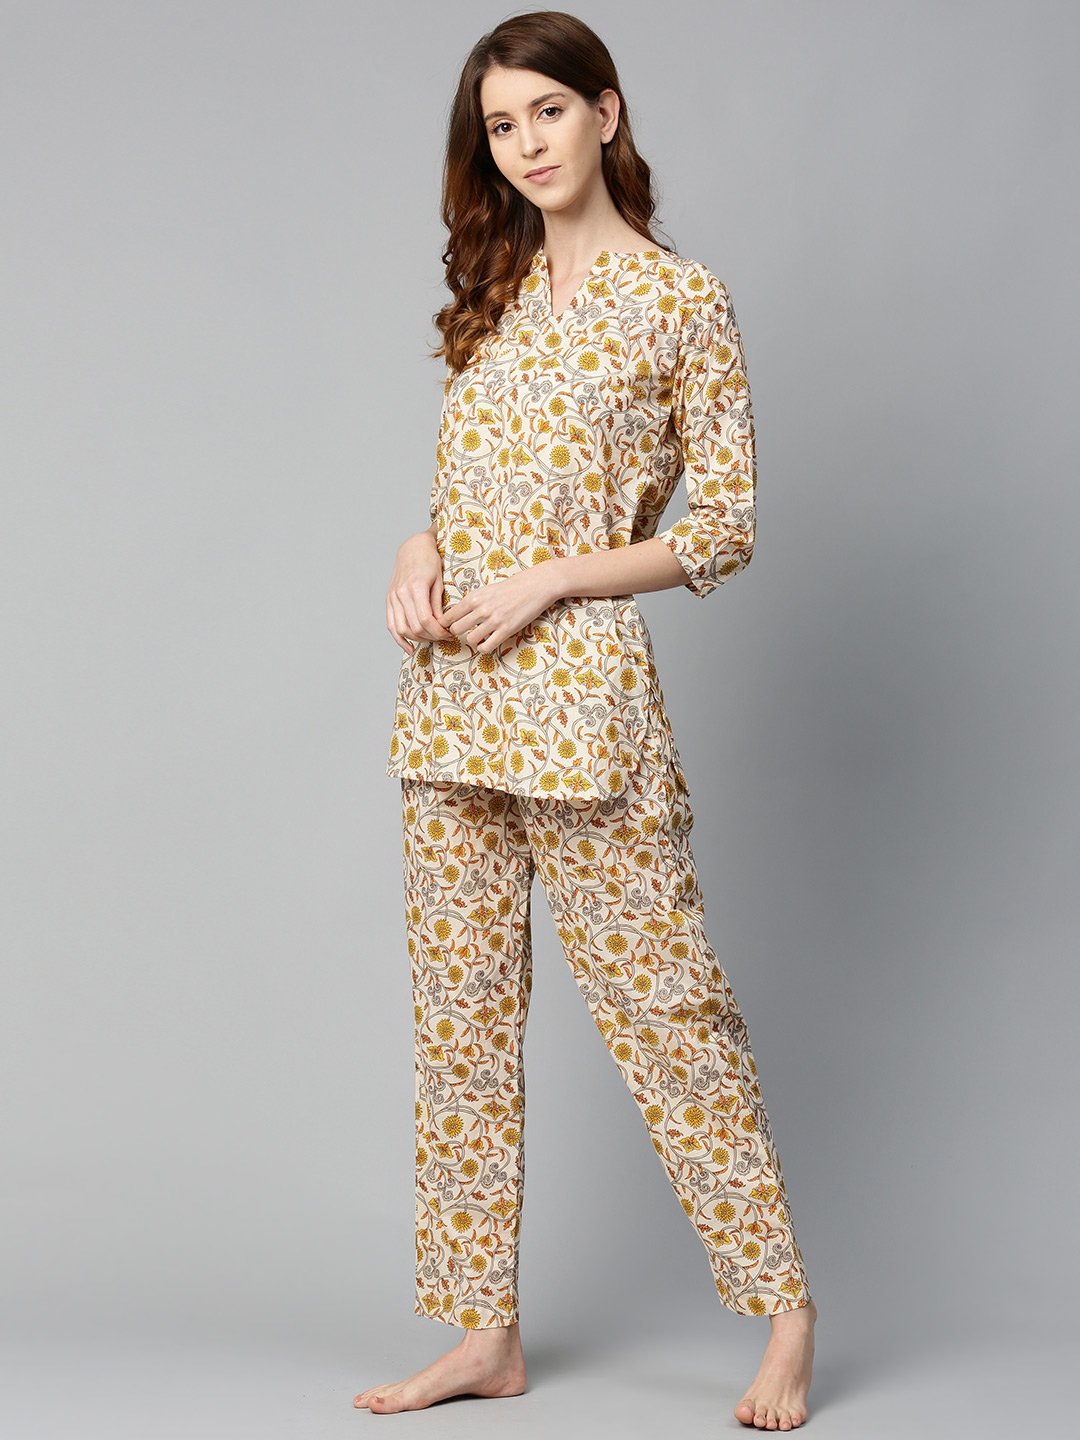 Women's Cream And Multi Floral Prnt Top And Pant Set - Nayo Clothing